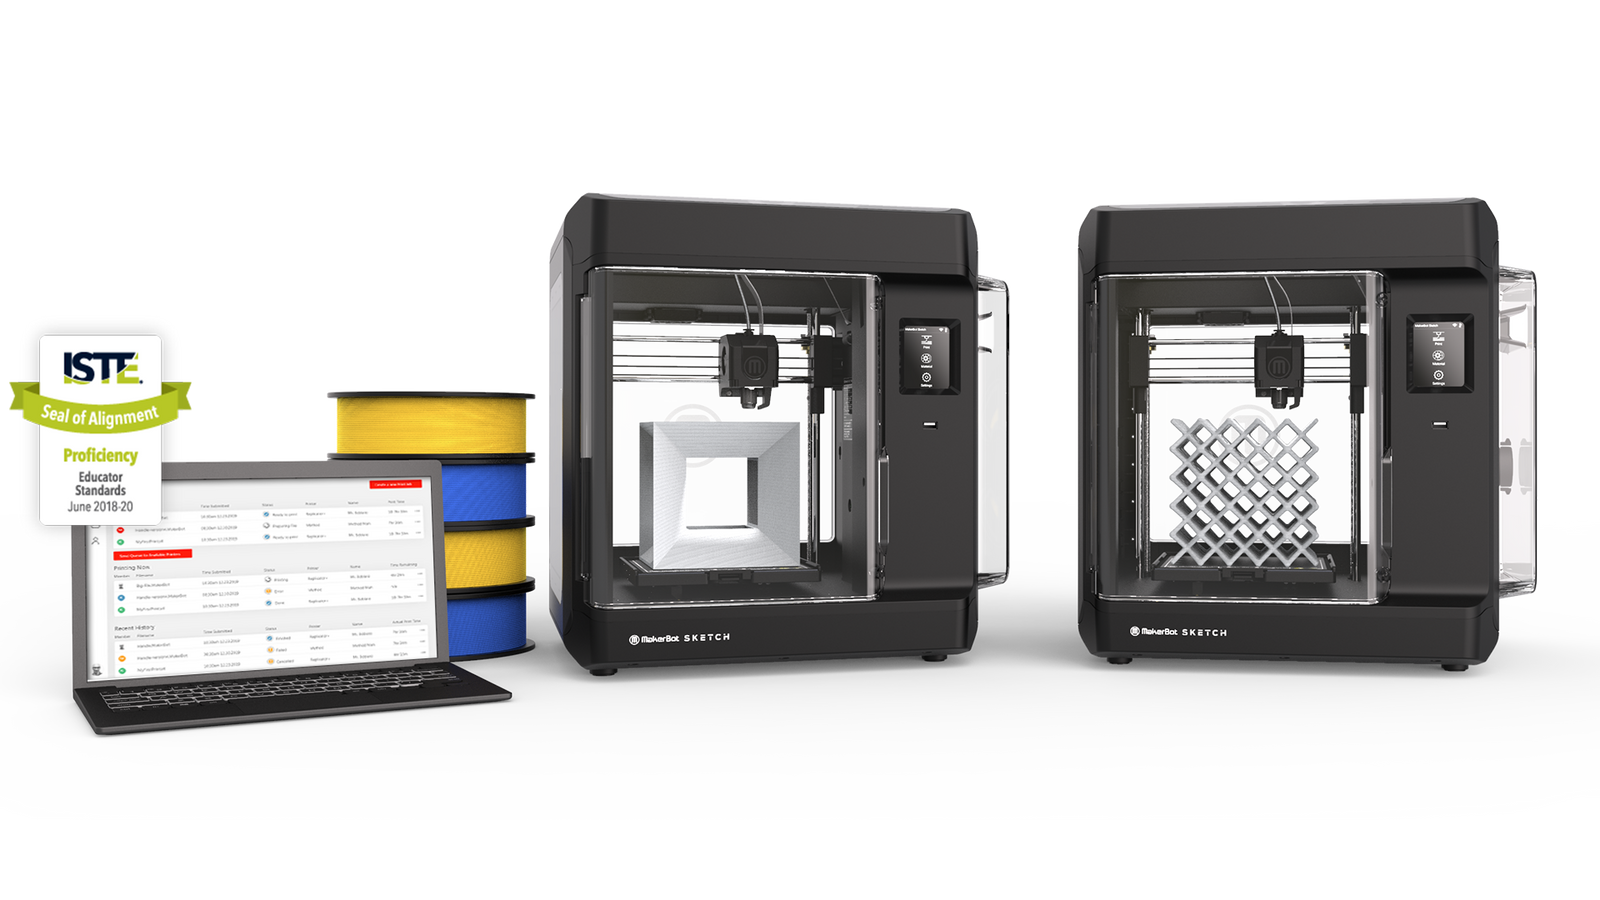 Introducing the MakerBot SKETCH 3D Printers